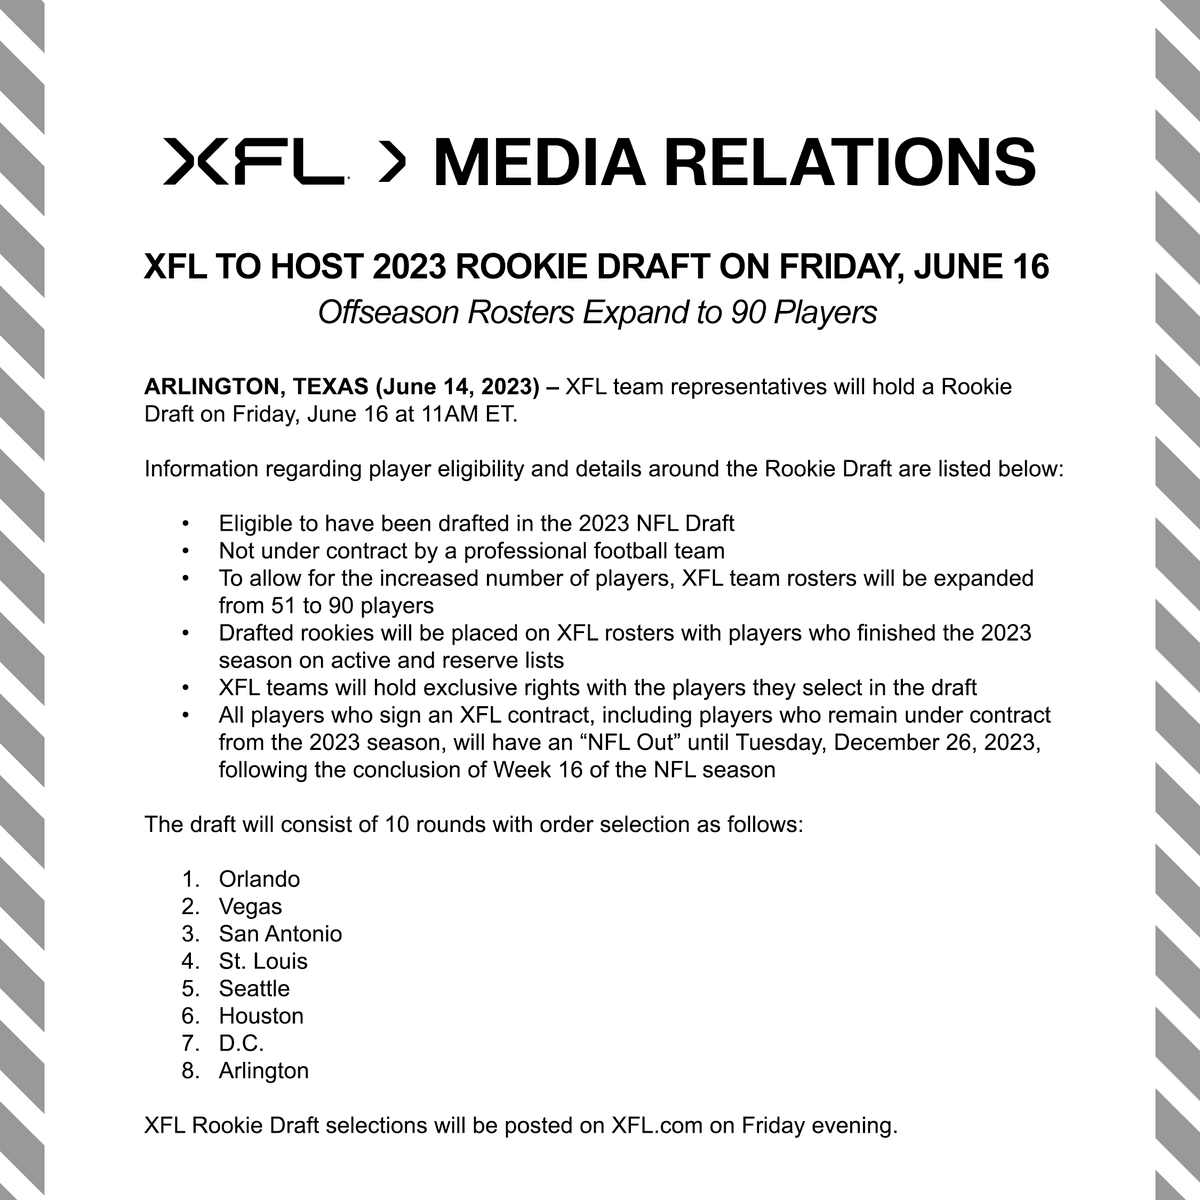 XFL team representatives will hold a Rookie Draft on Friday, June 16 at 11 AM ET.